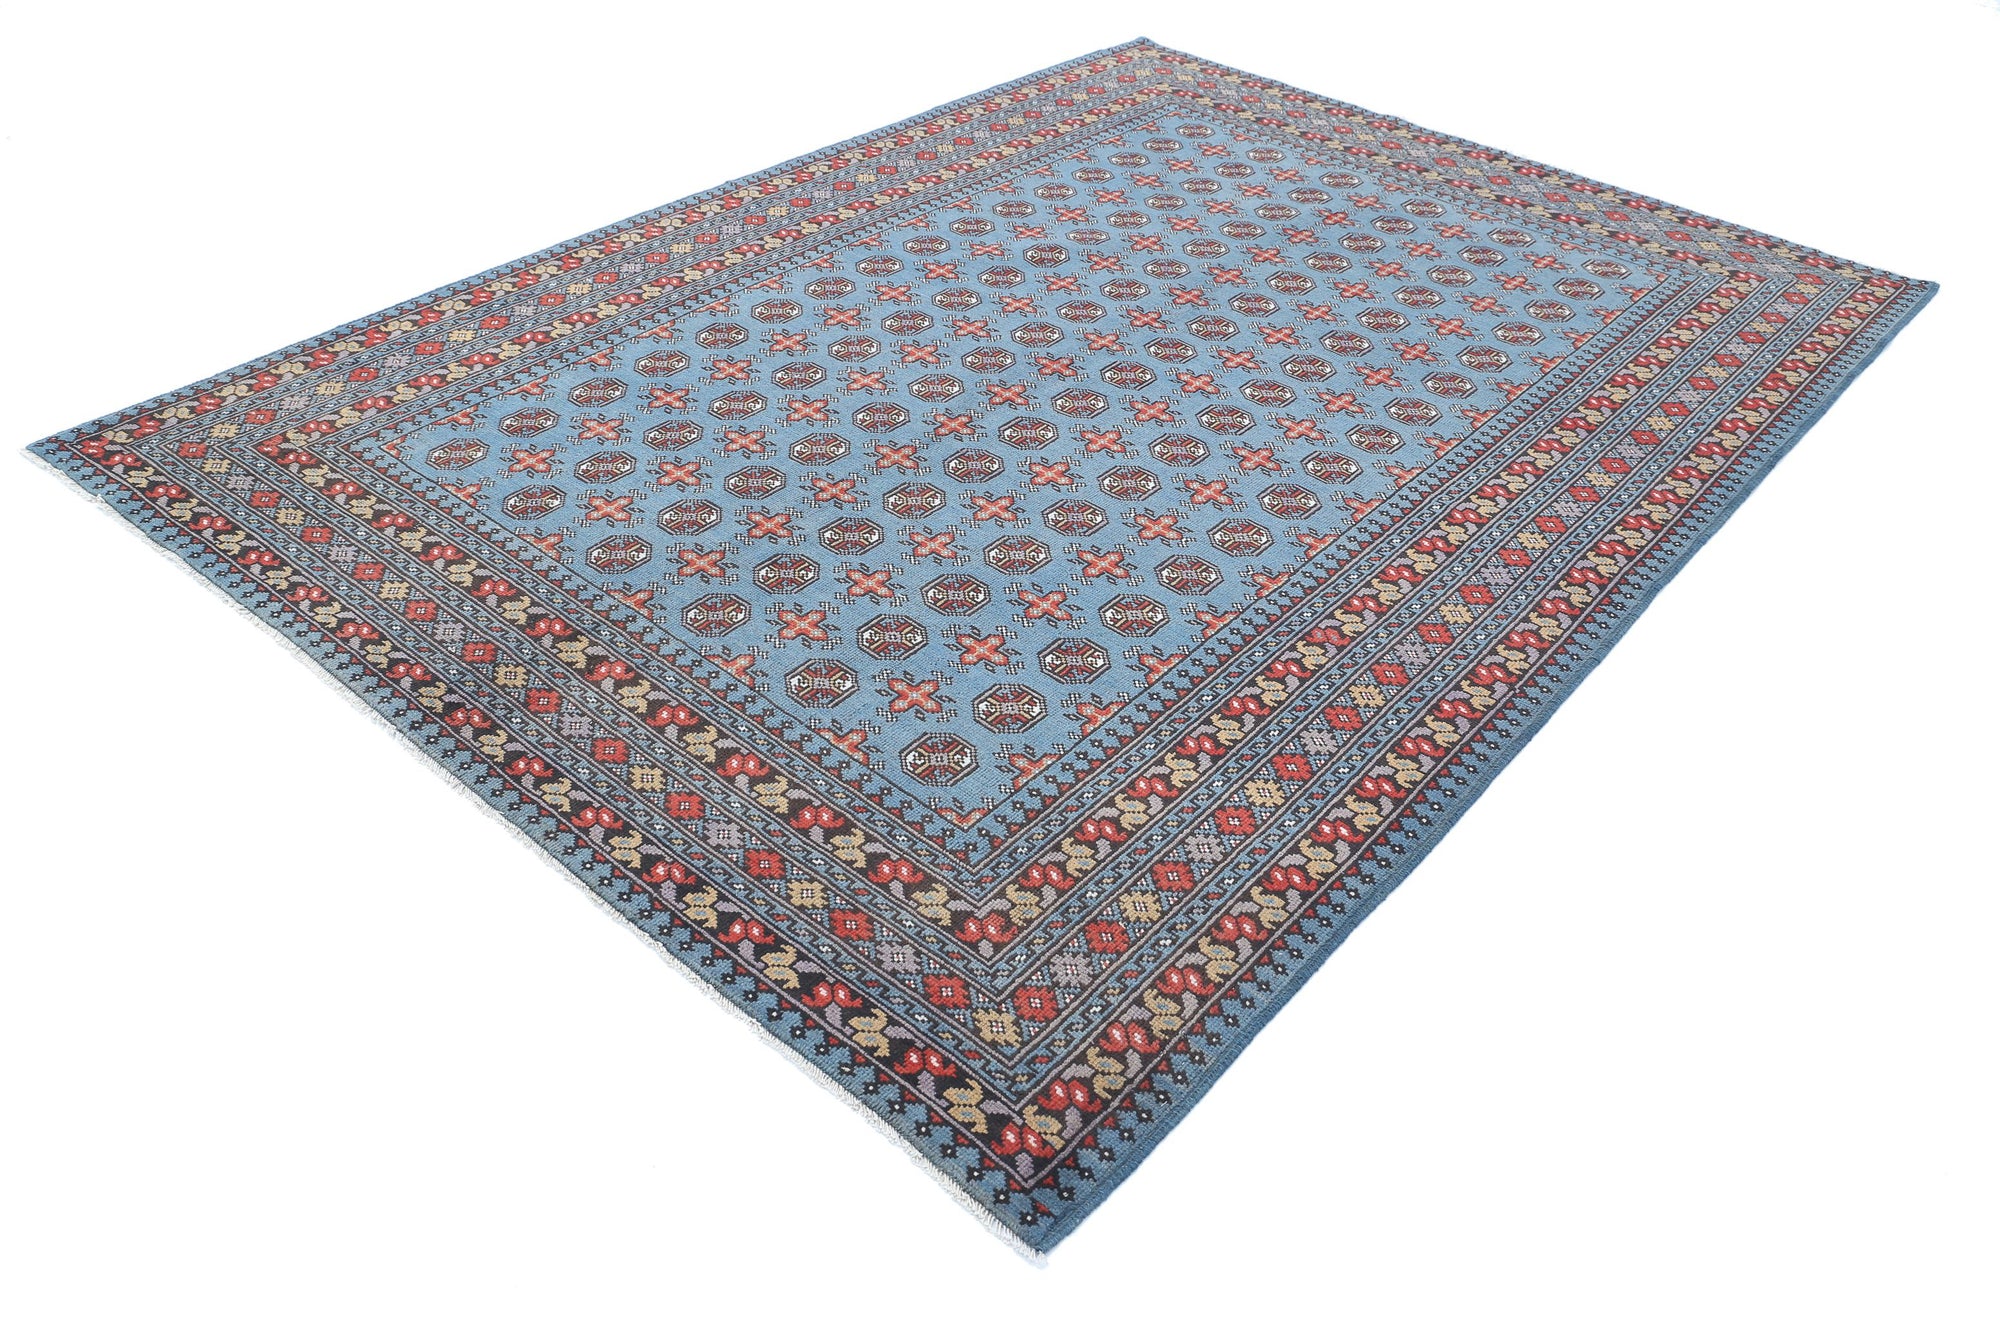 Revival-hand-knotted-gul-collection-wool-rug-5013960-2.jpg